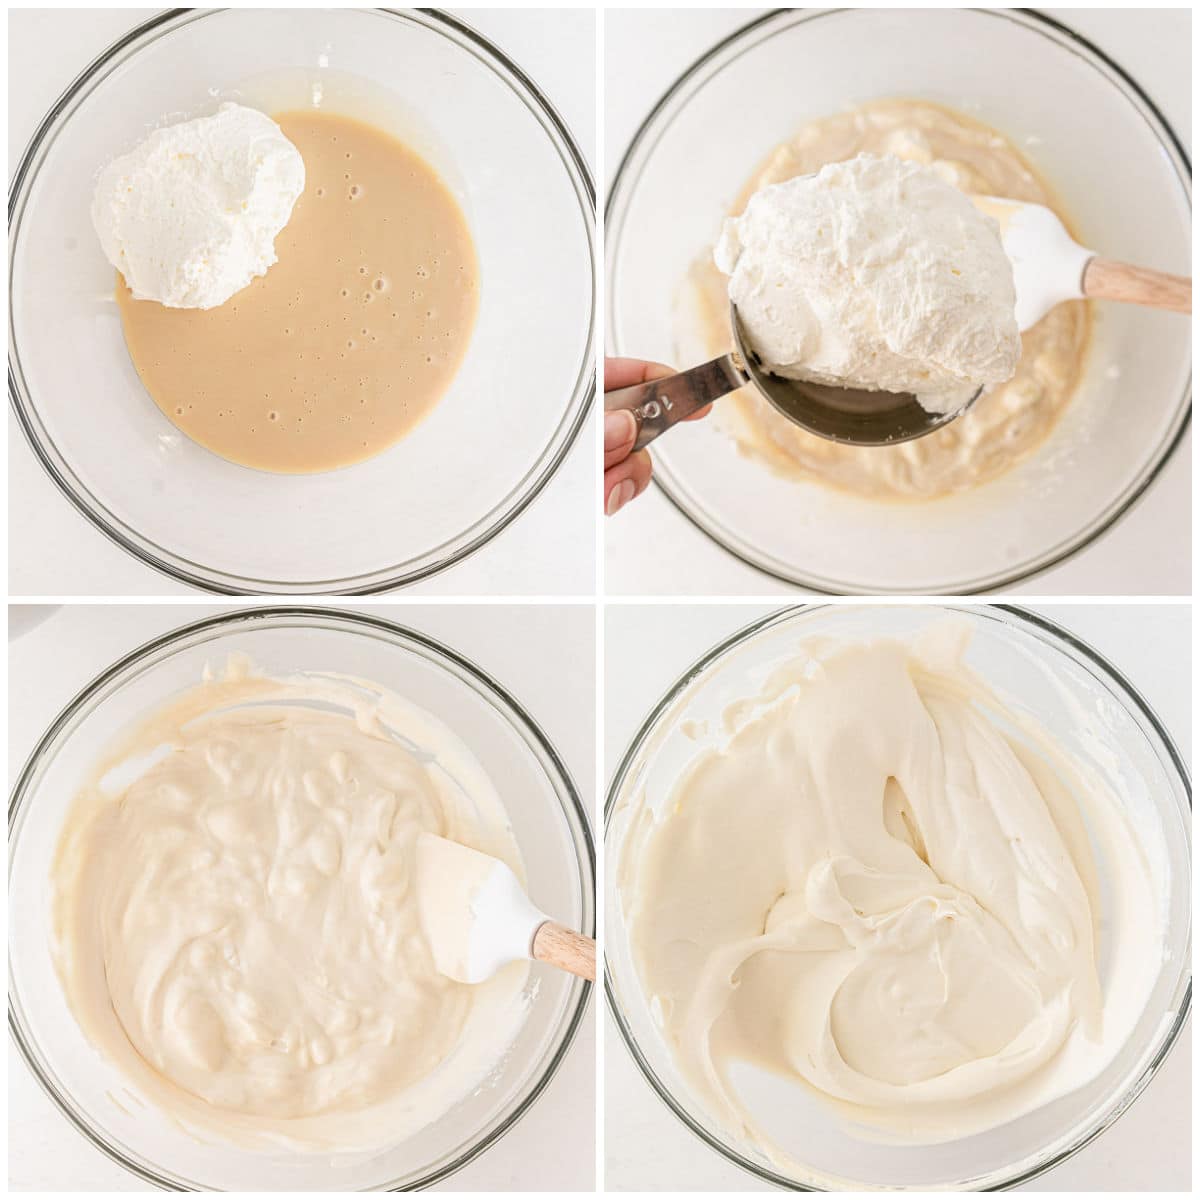 whipped being gradually added to condensed milk and stirred in.